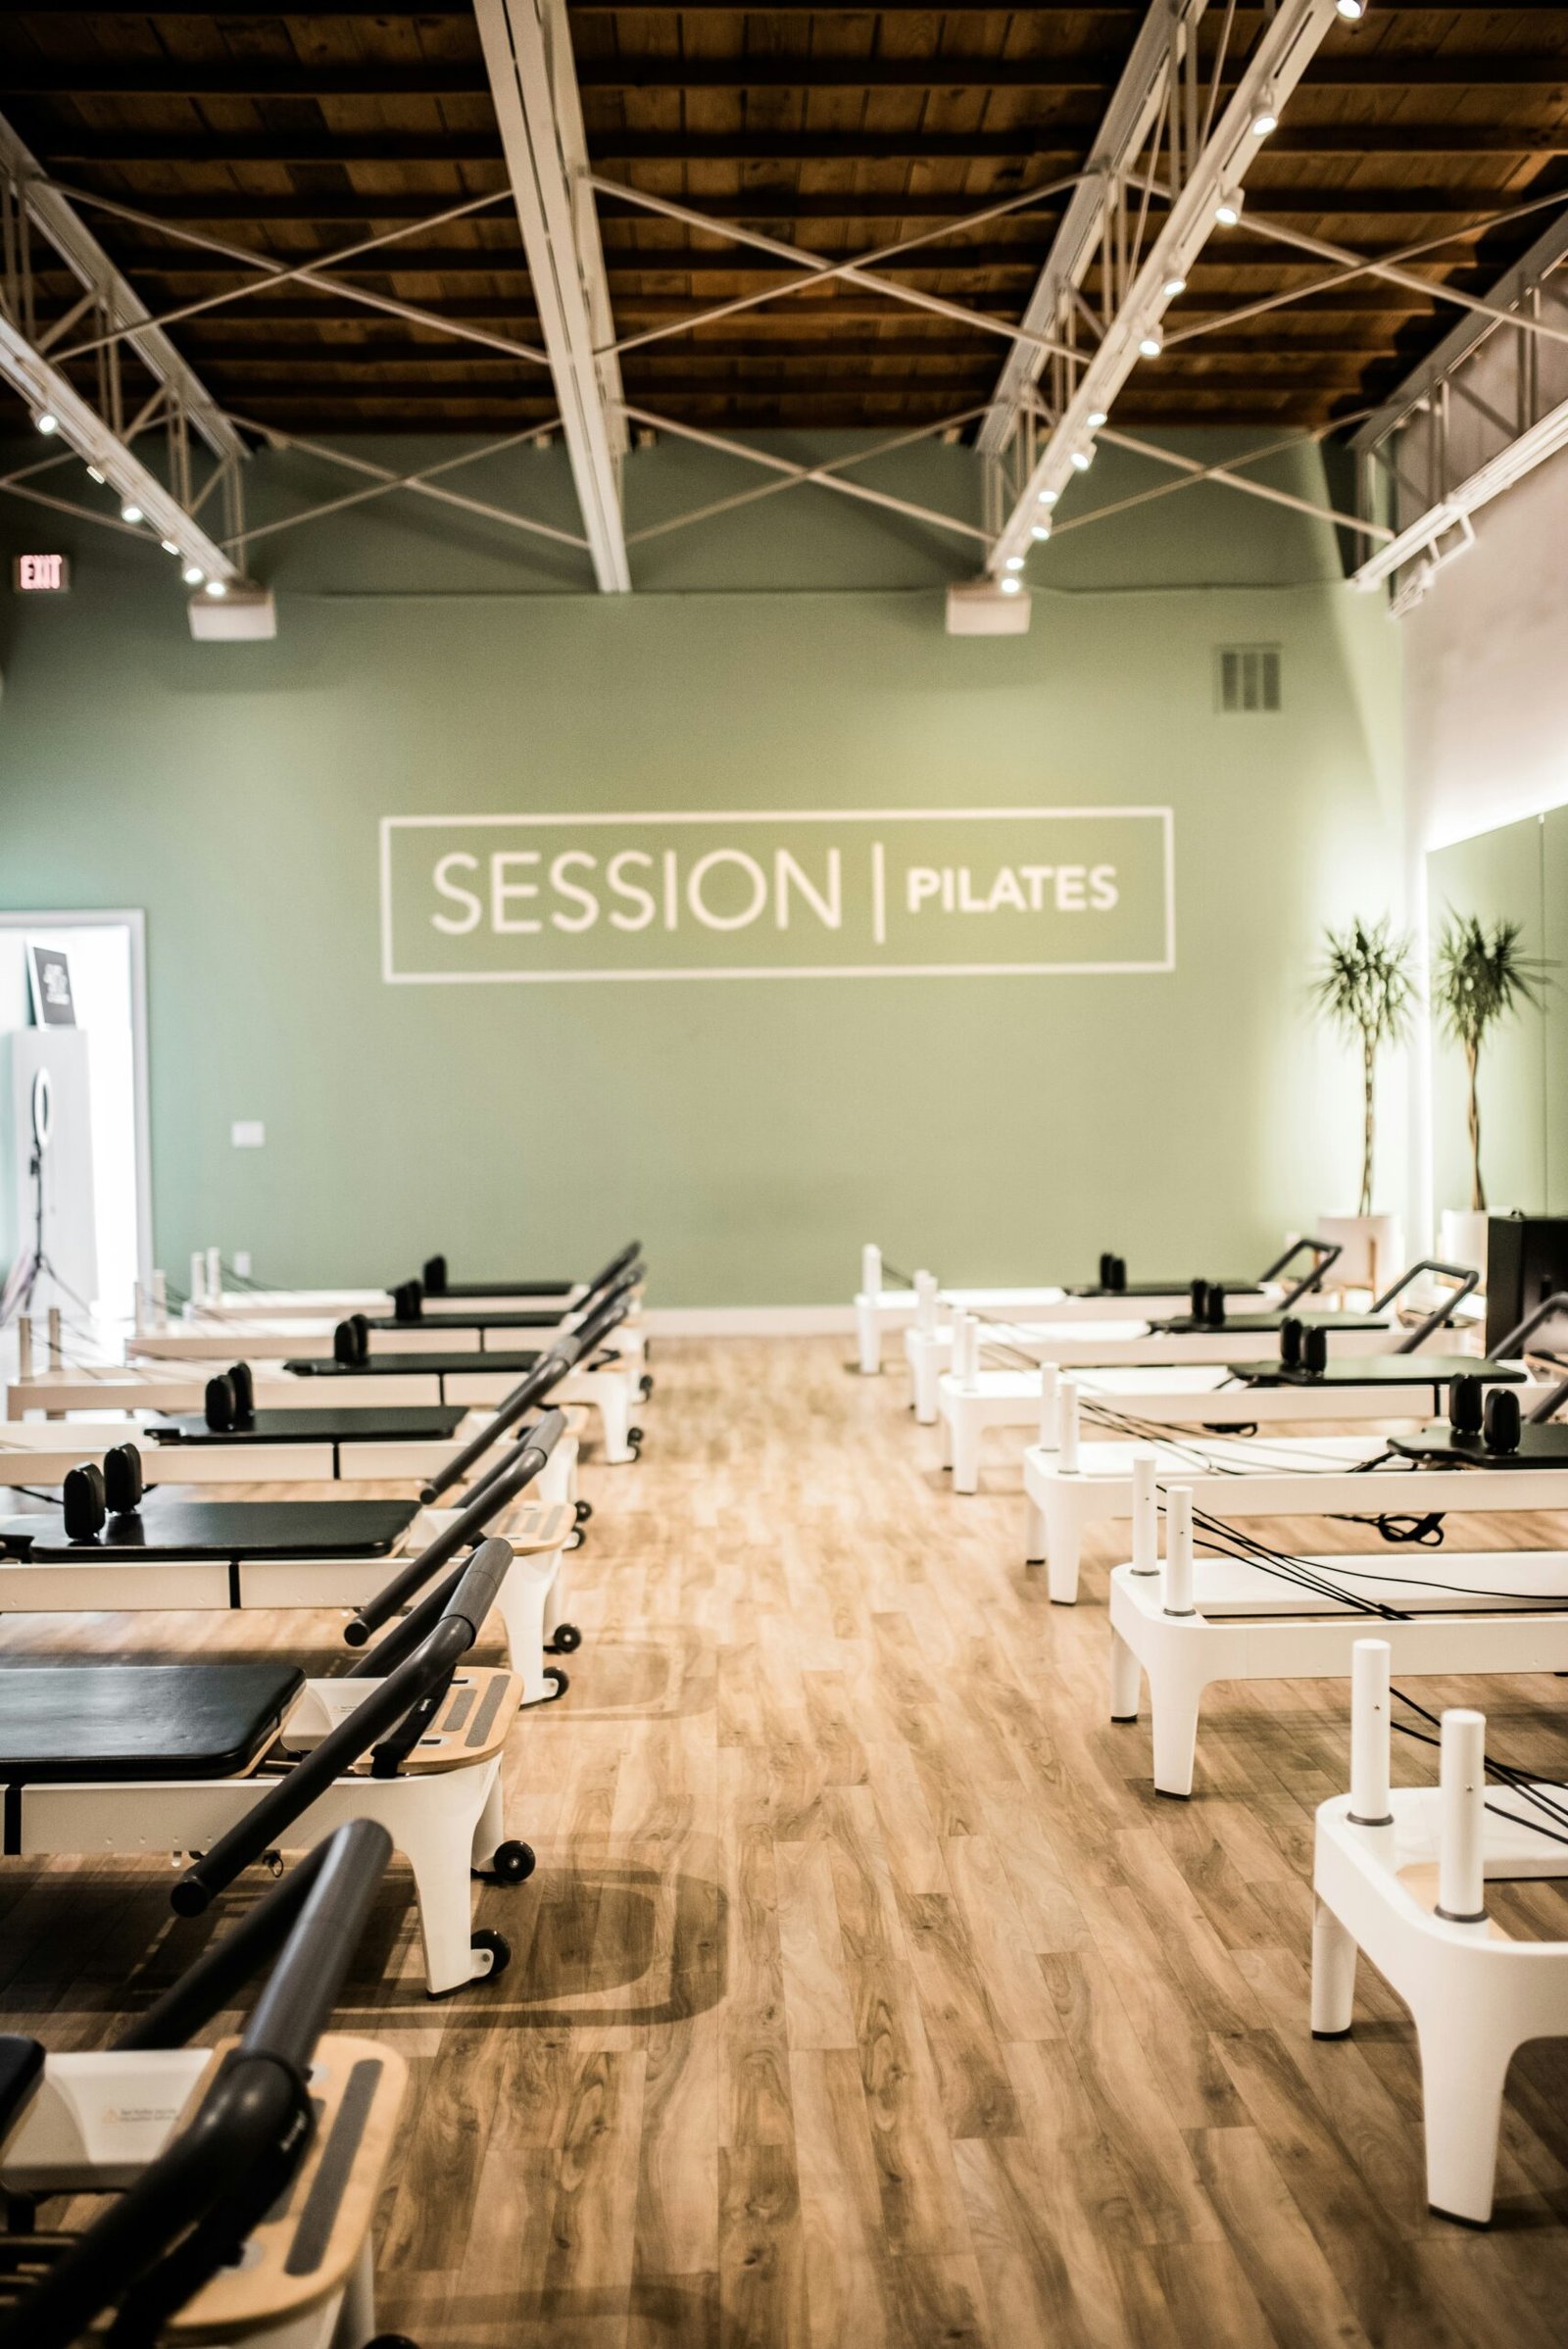 What Should I Know Before Taking Reformer Pilates Class? 8 Tips For a Successful First Class